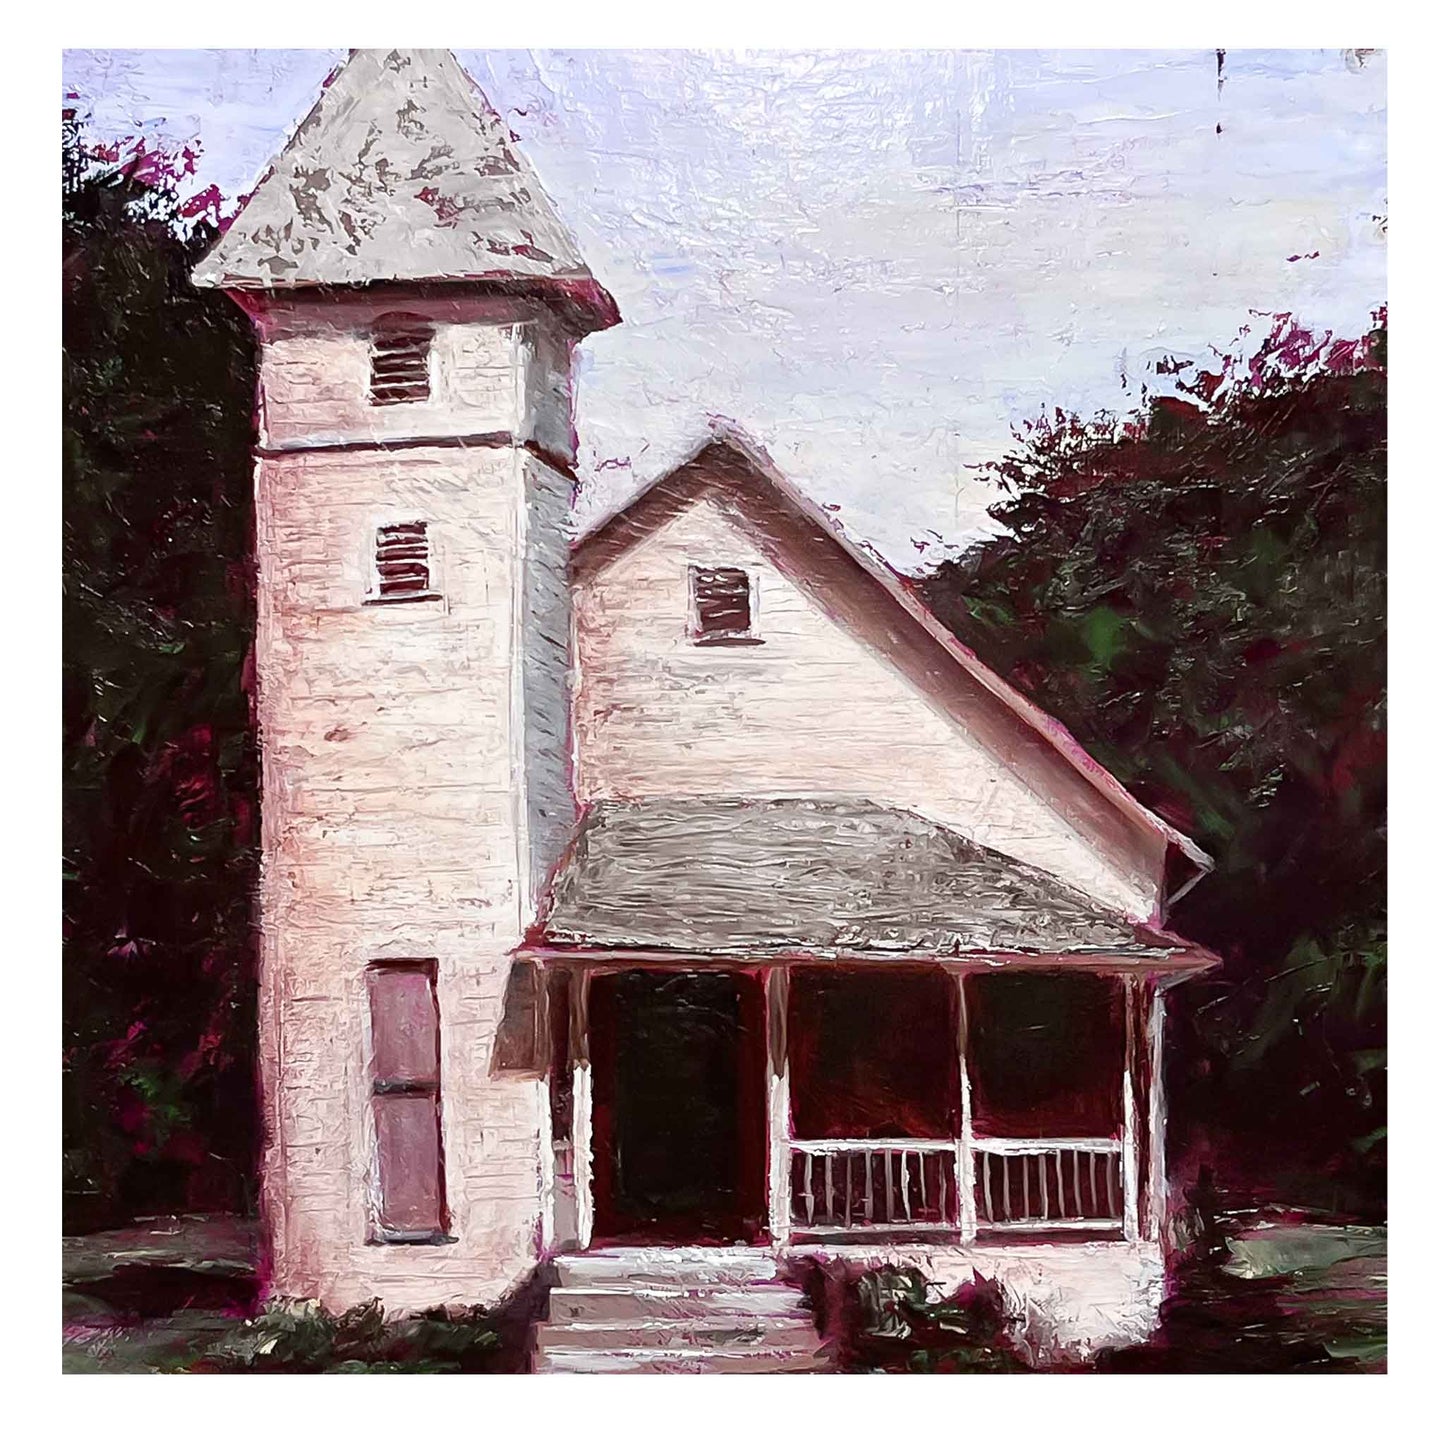 JRO Old Time Religion Oil Painting of Church by Artist Becky Owen. A nostalgic, original acrylic painting of an old country church. Features a cream colored church surrounded by dark green trees. Louvered windows and a tiny porch. Framed in a rustic wooden frame it measures 14 " x 17" and is ready to hang.